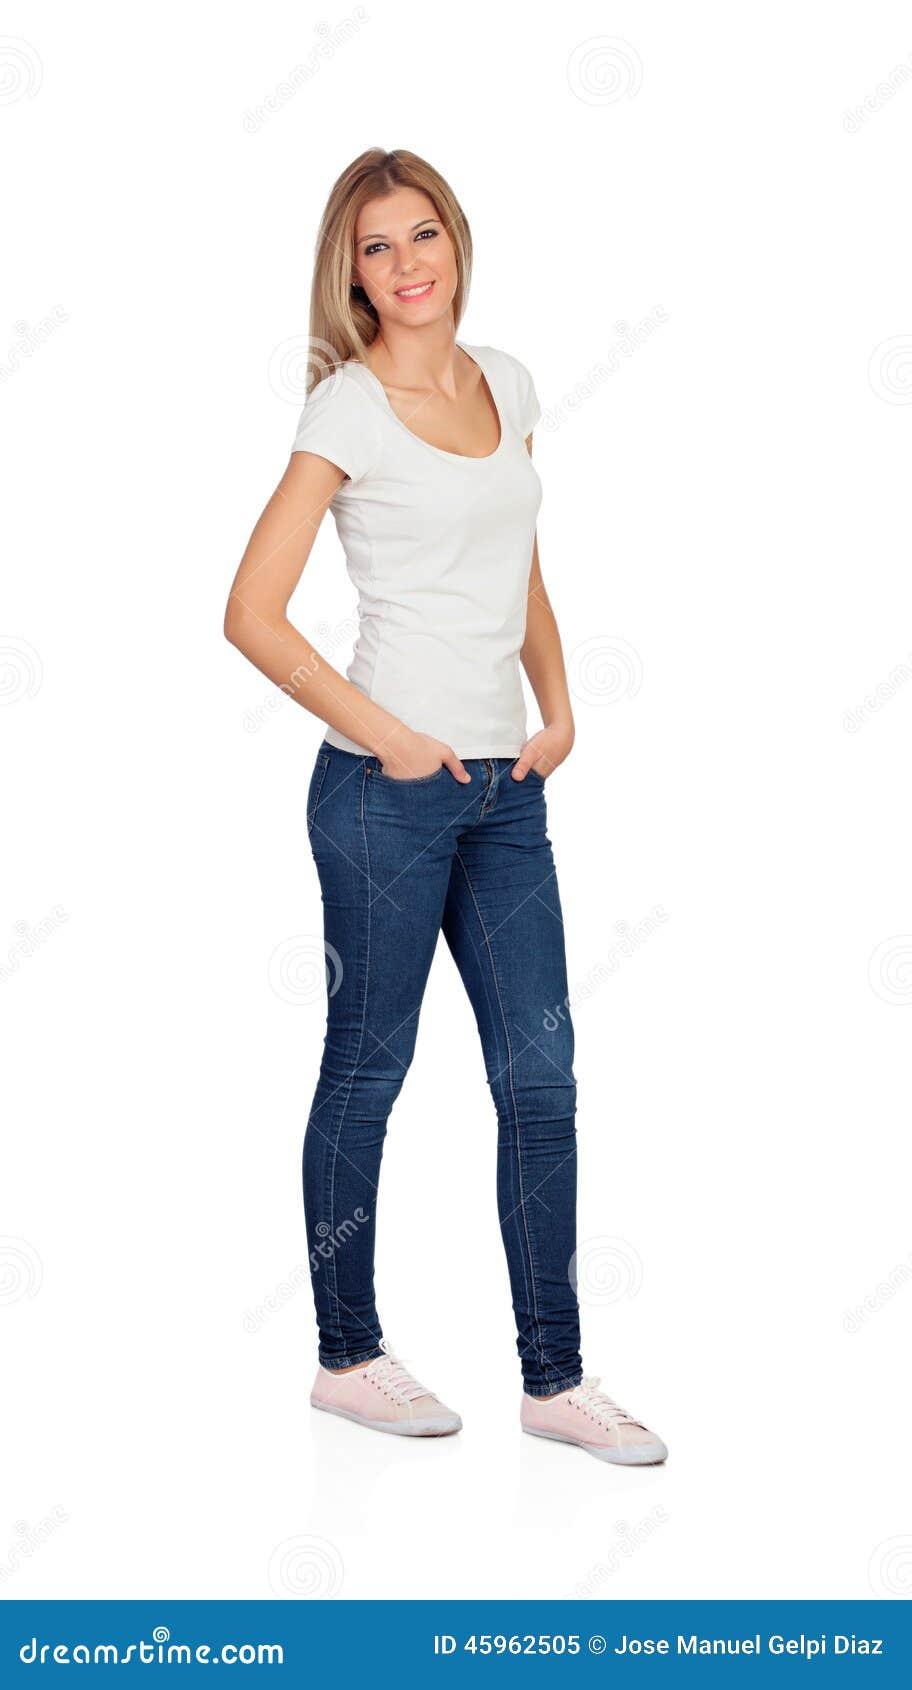 Casual Blonde Girl With Jeans Stock Image - Image of adult, caucasian ...